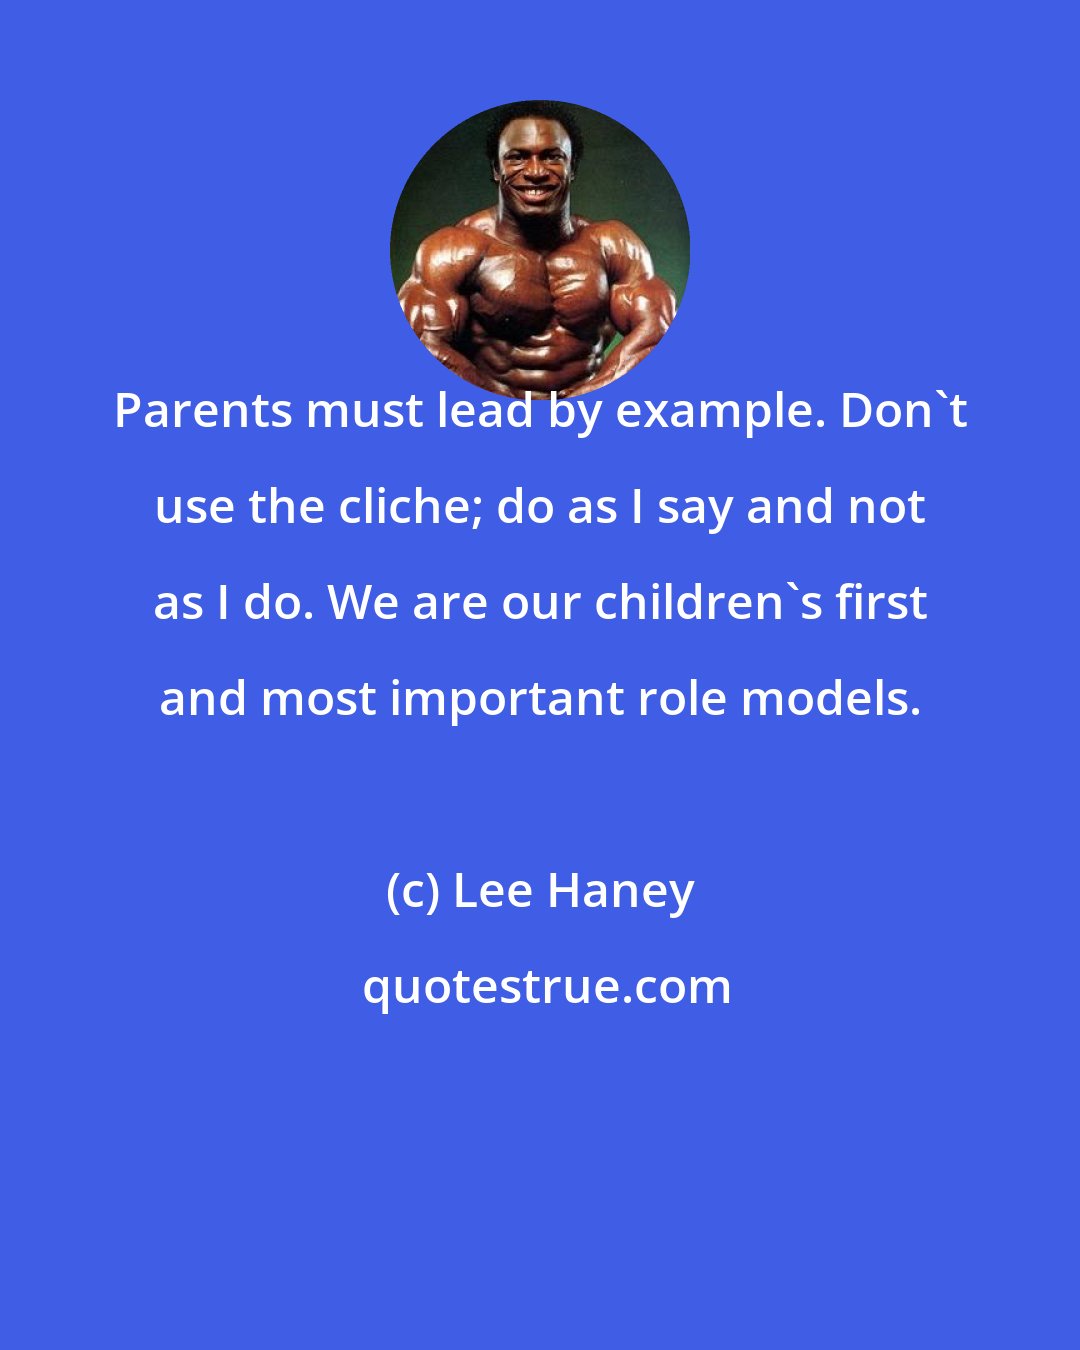 Lee Haney: Parents must lead by example. Don't use the cliche; do as I say and not as I do. We are our children's first and most important role models.